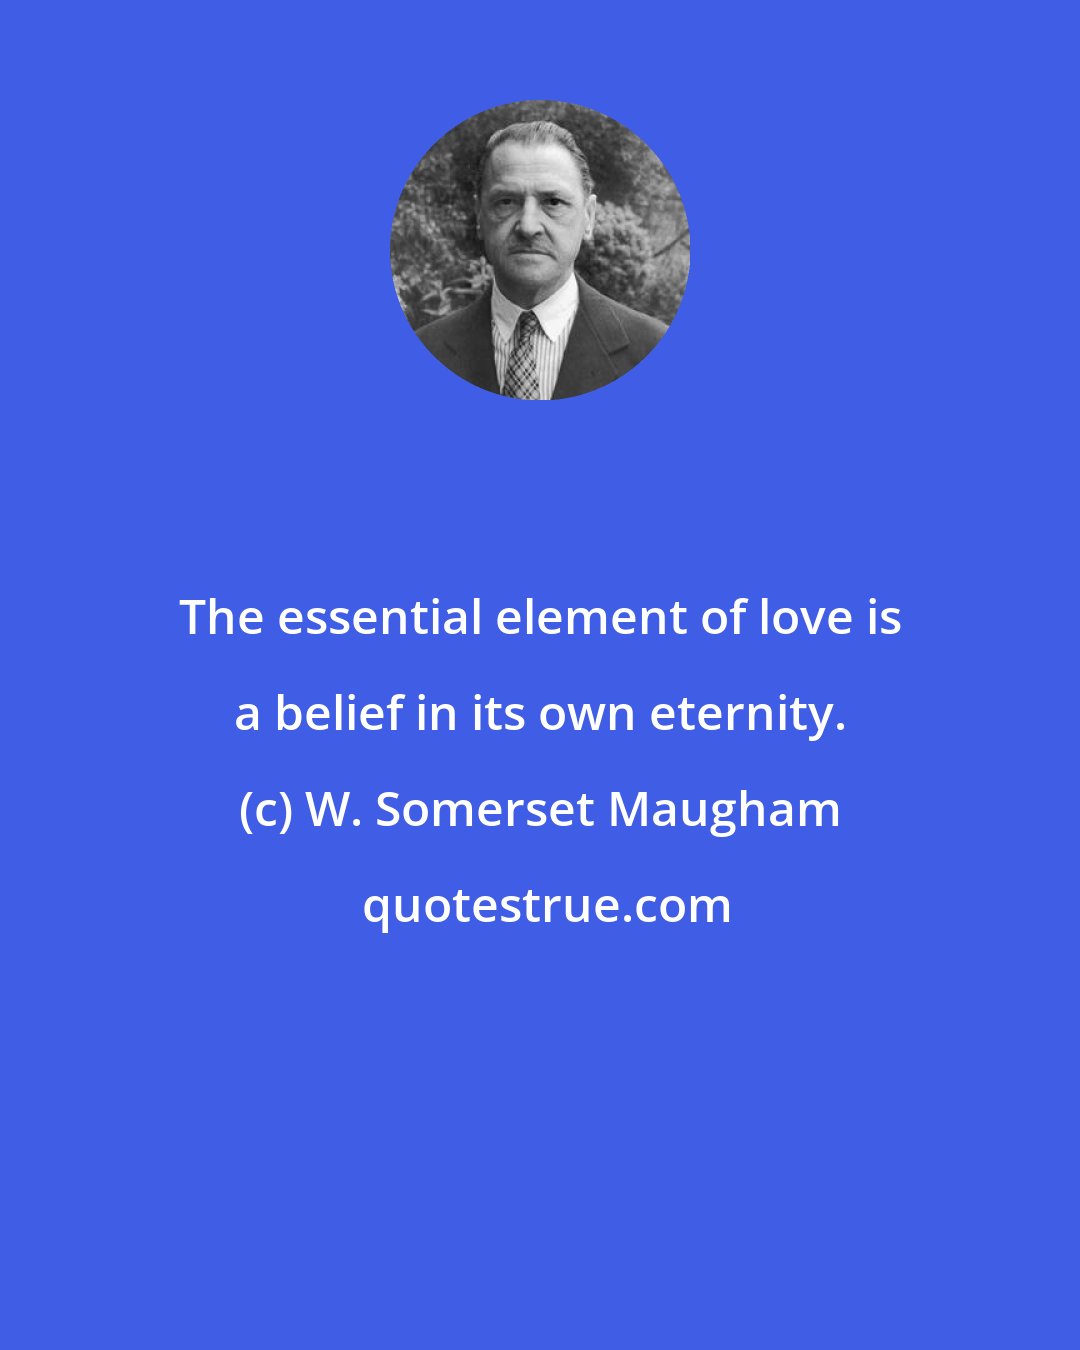 W. Somerset Maugham: The essential element of love is a belief in its own eternity.